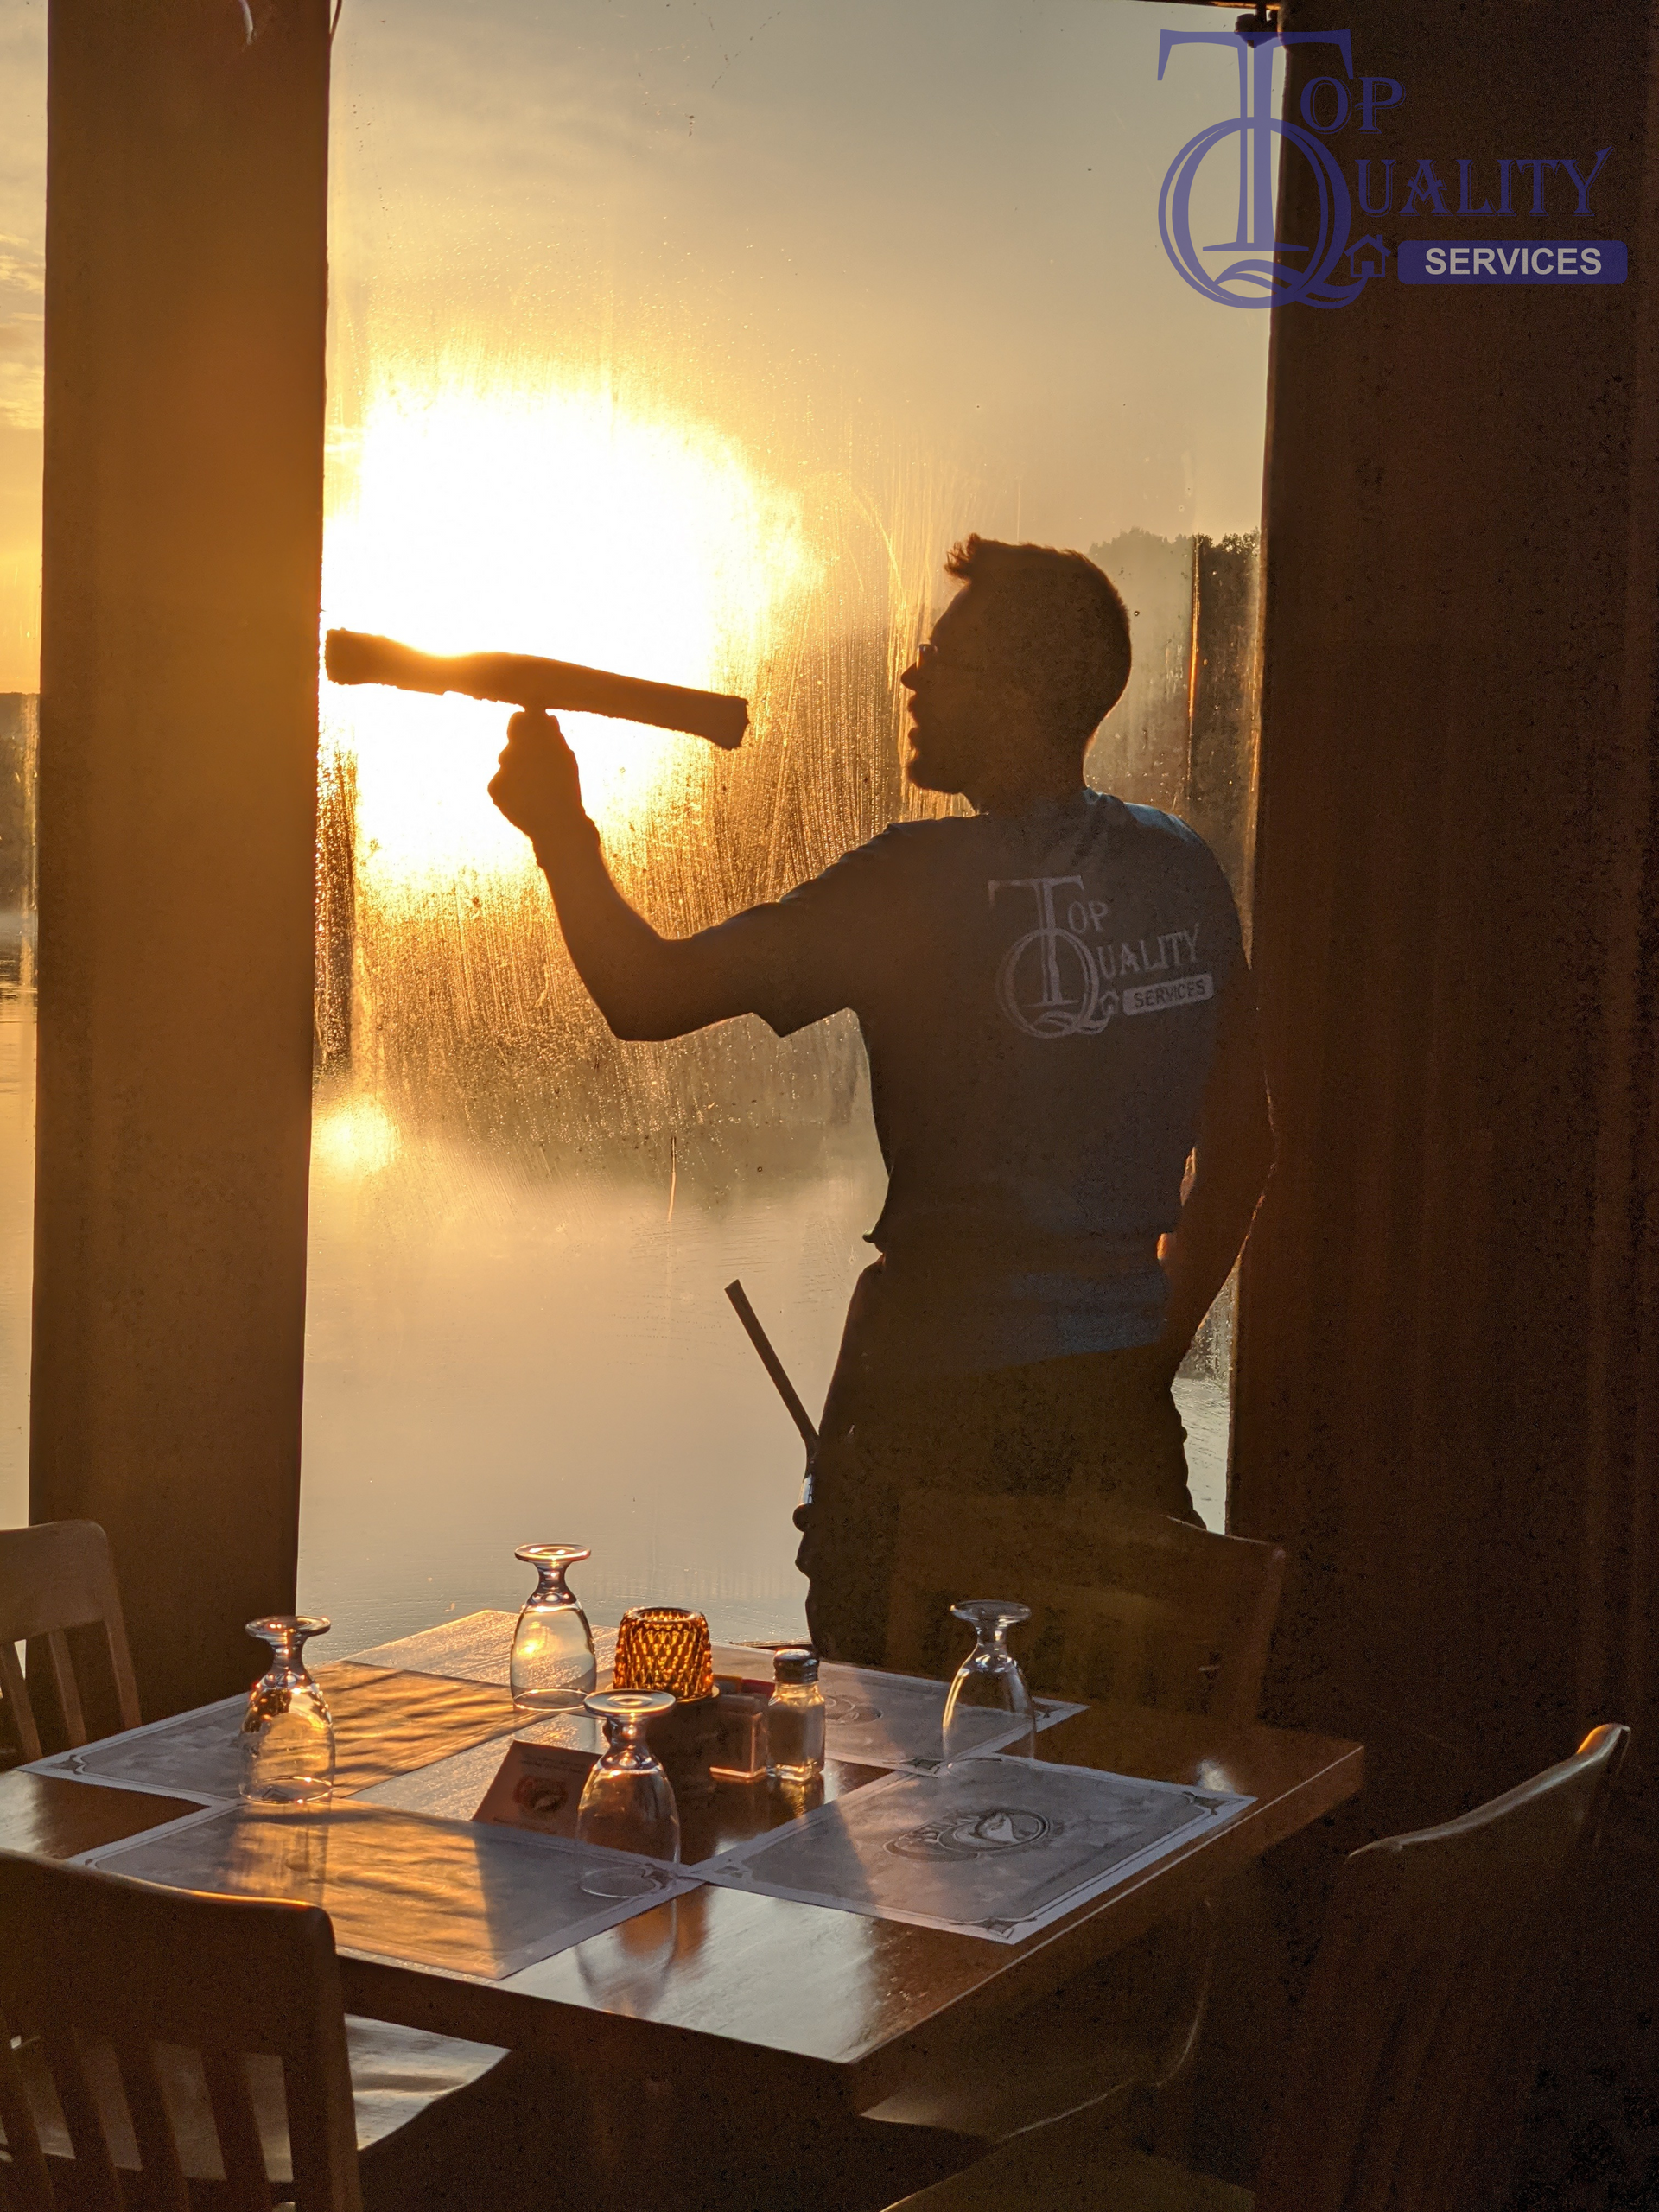 A man is cleaning a window in a restaurant at sunset